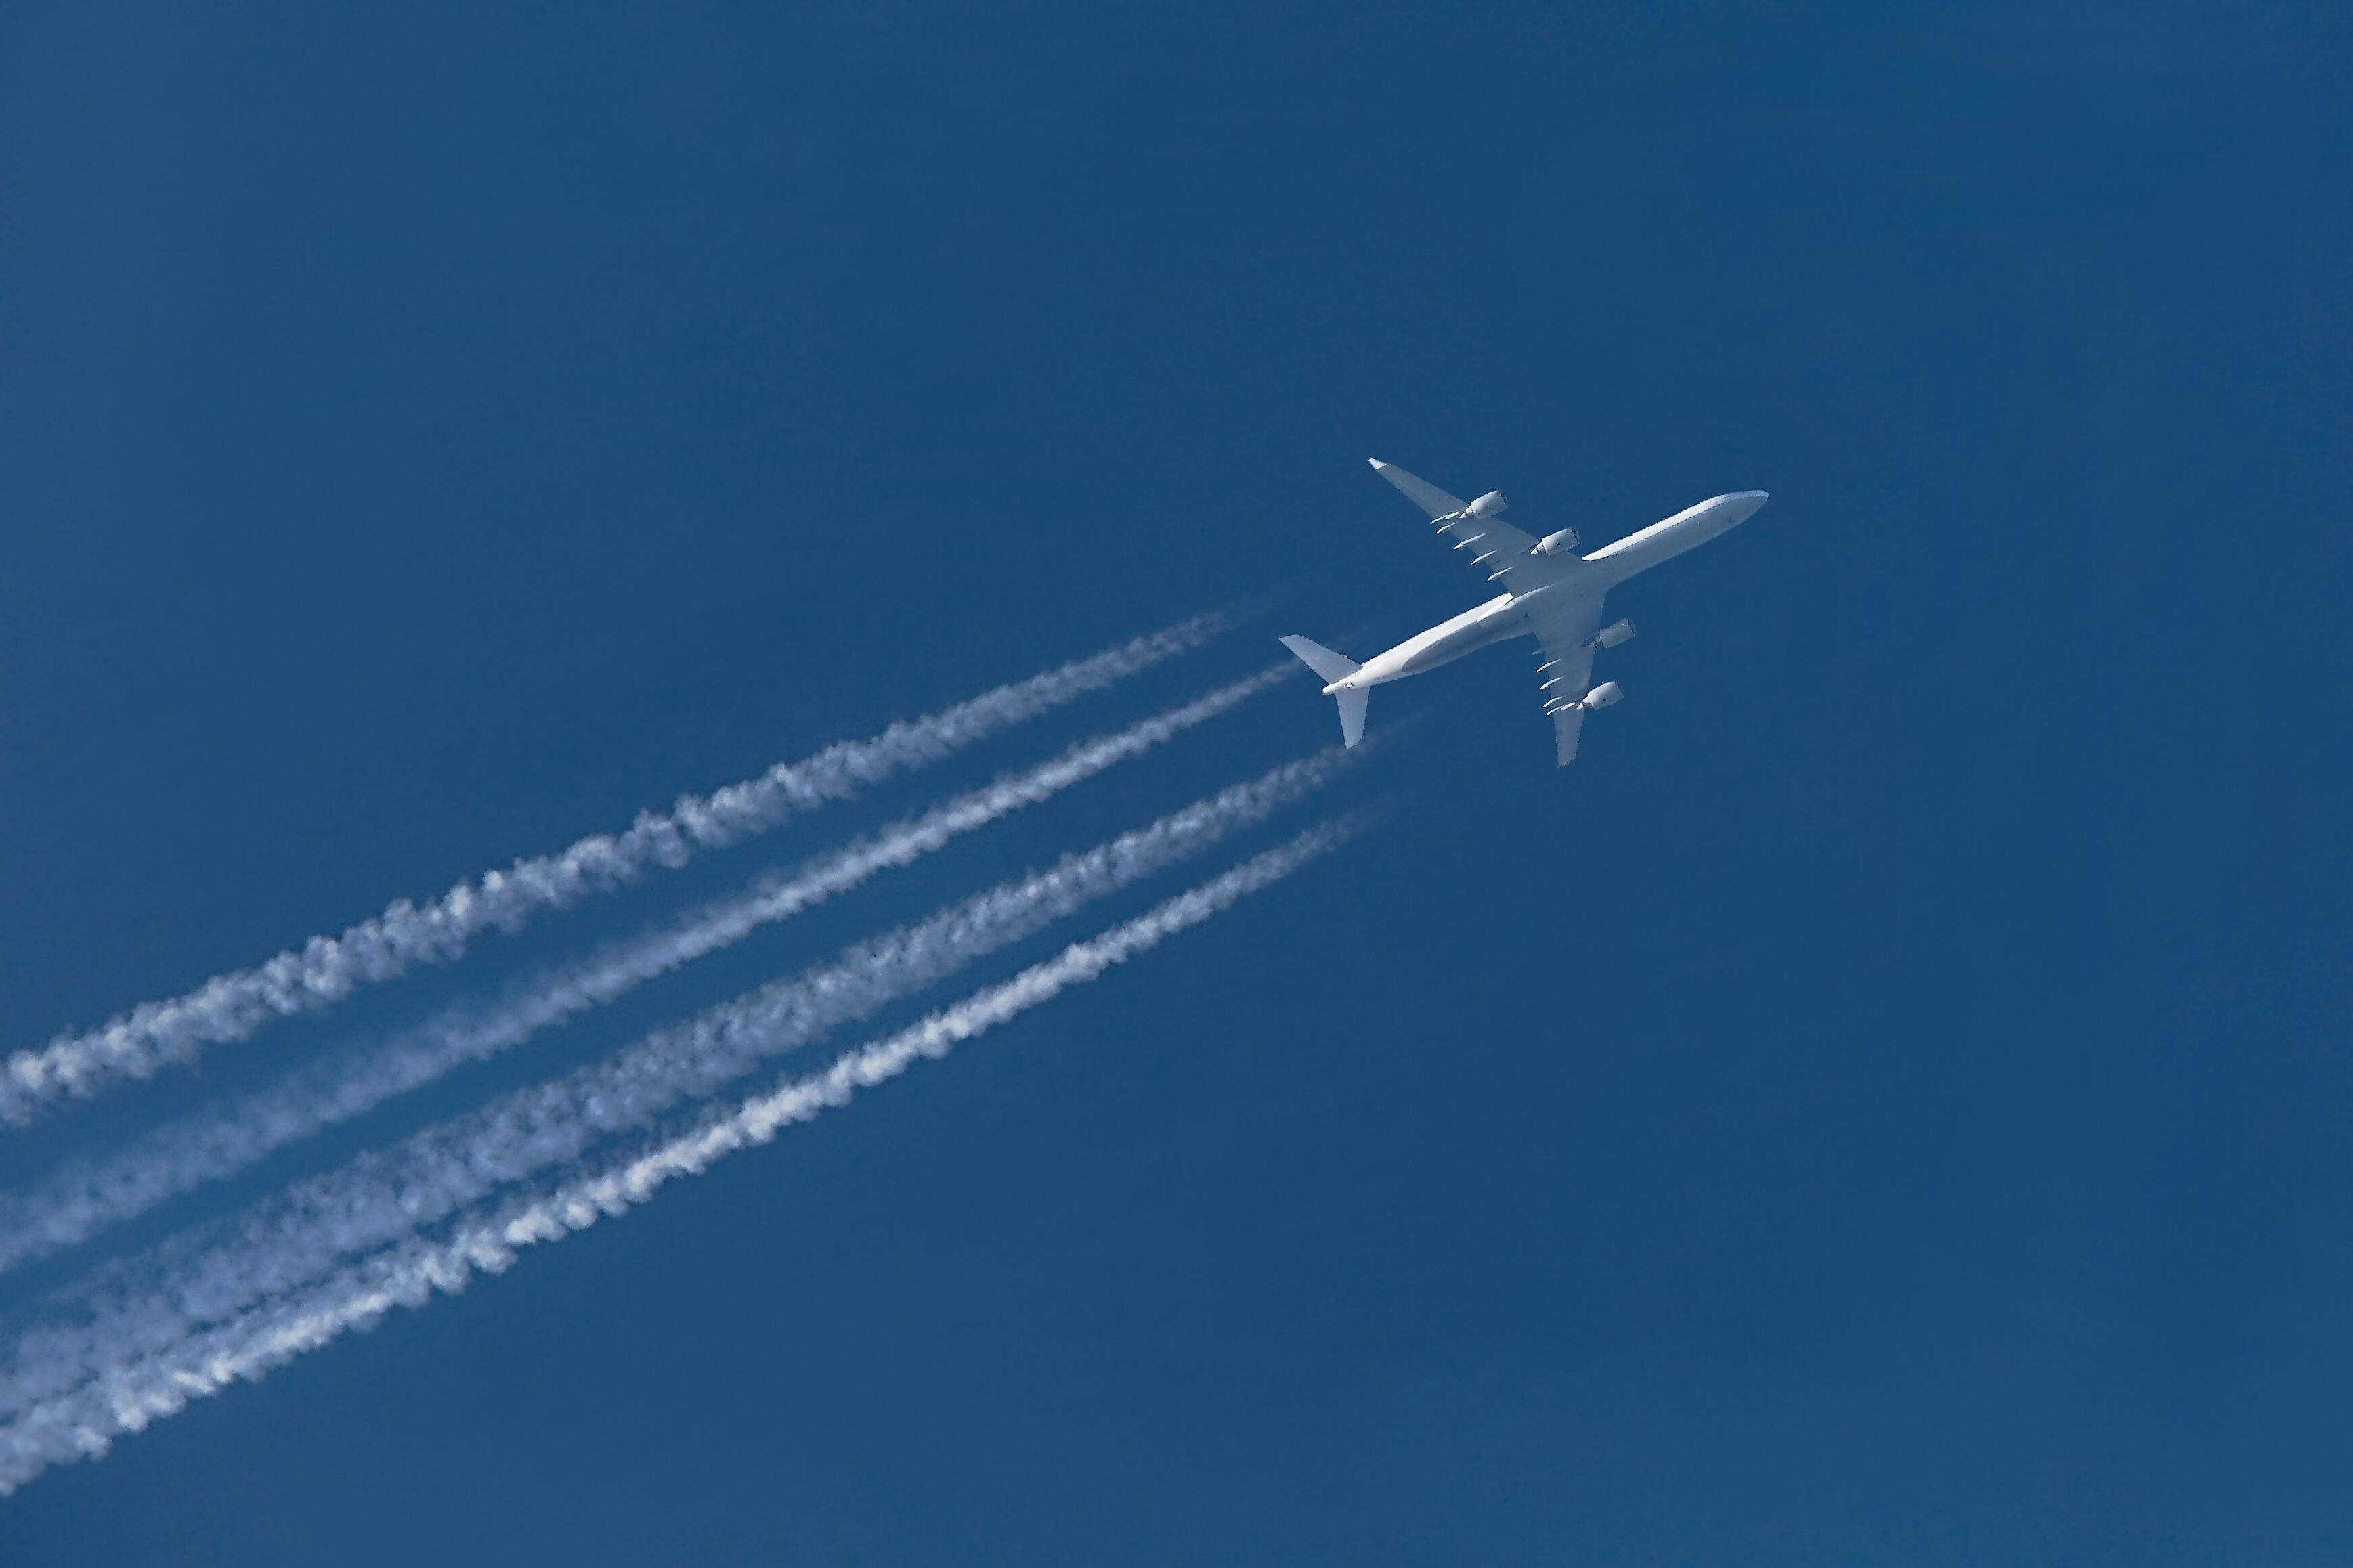 An aircraft flying seen from the ground leaving contrails as it moves through the sky.